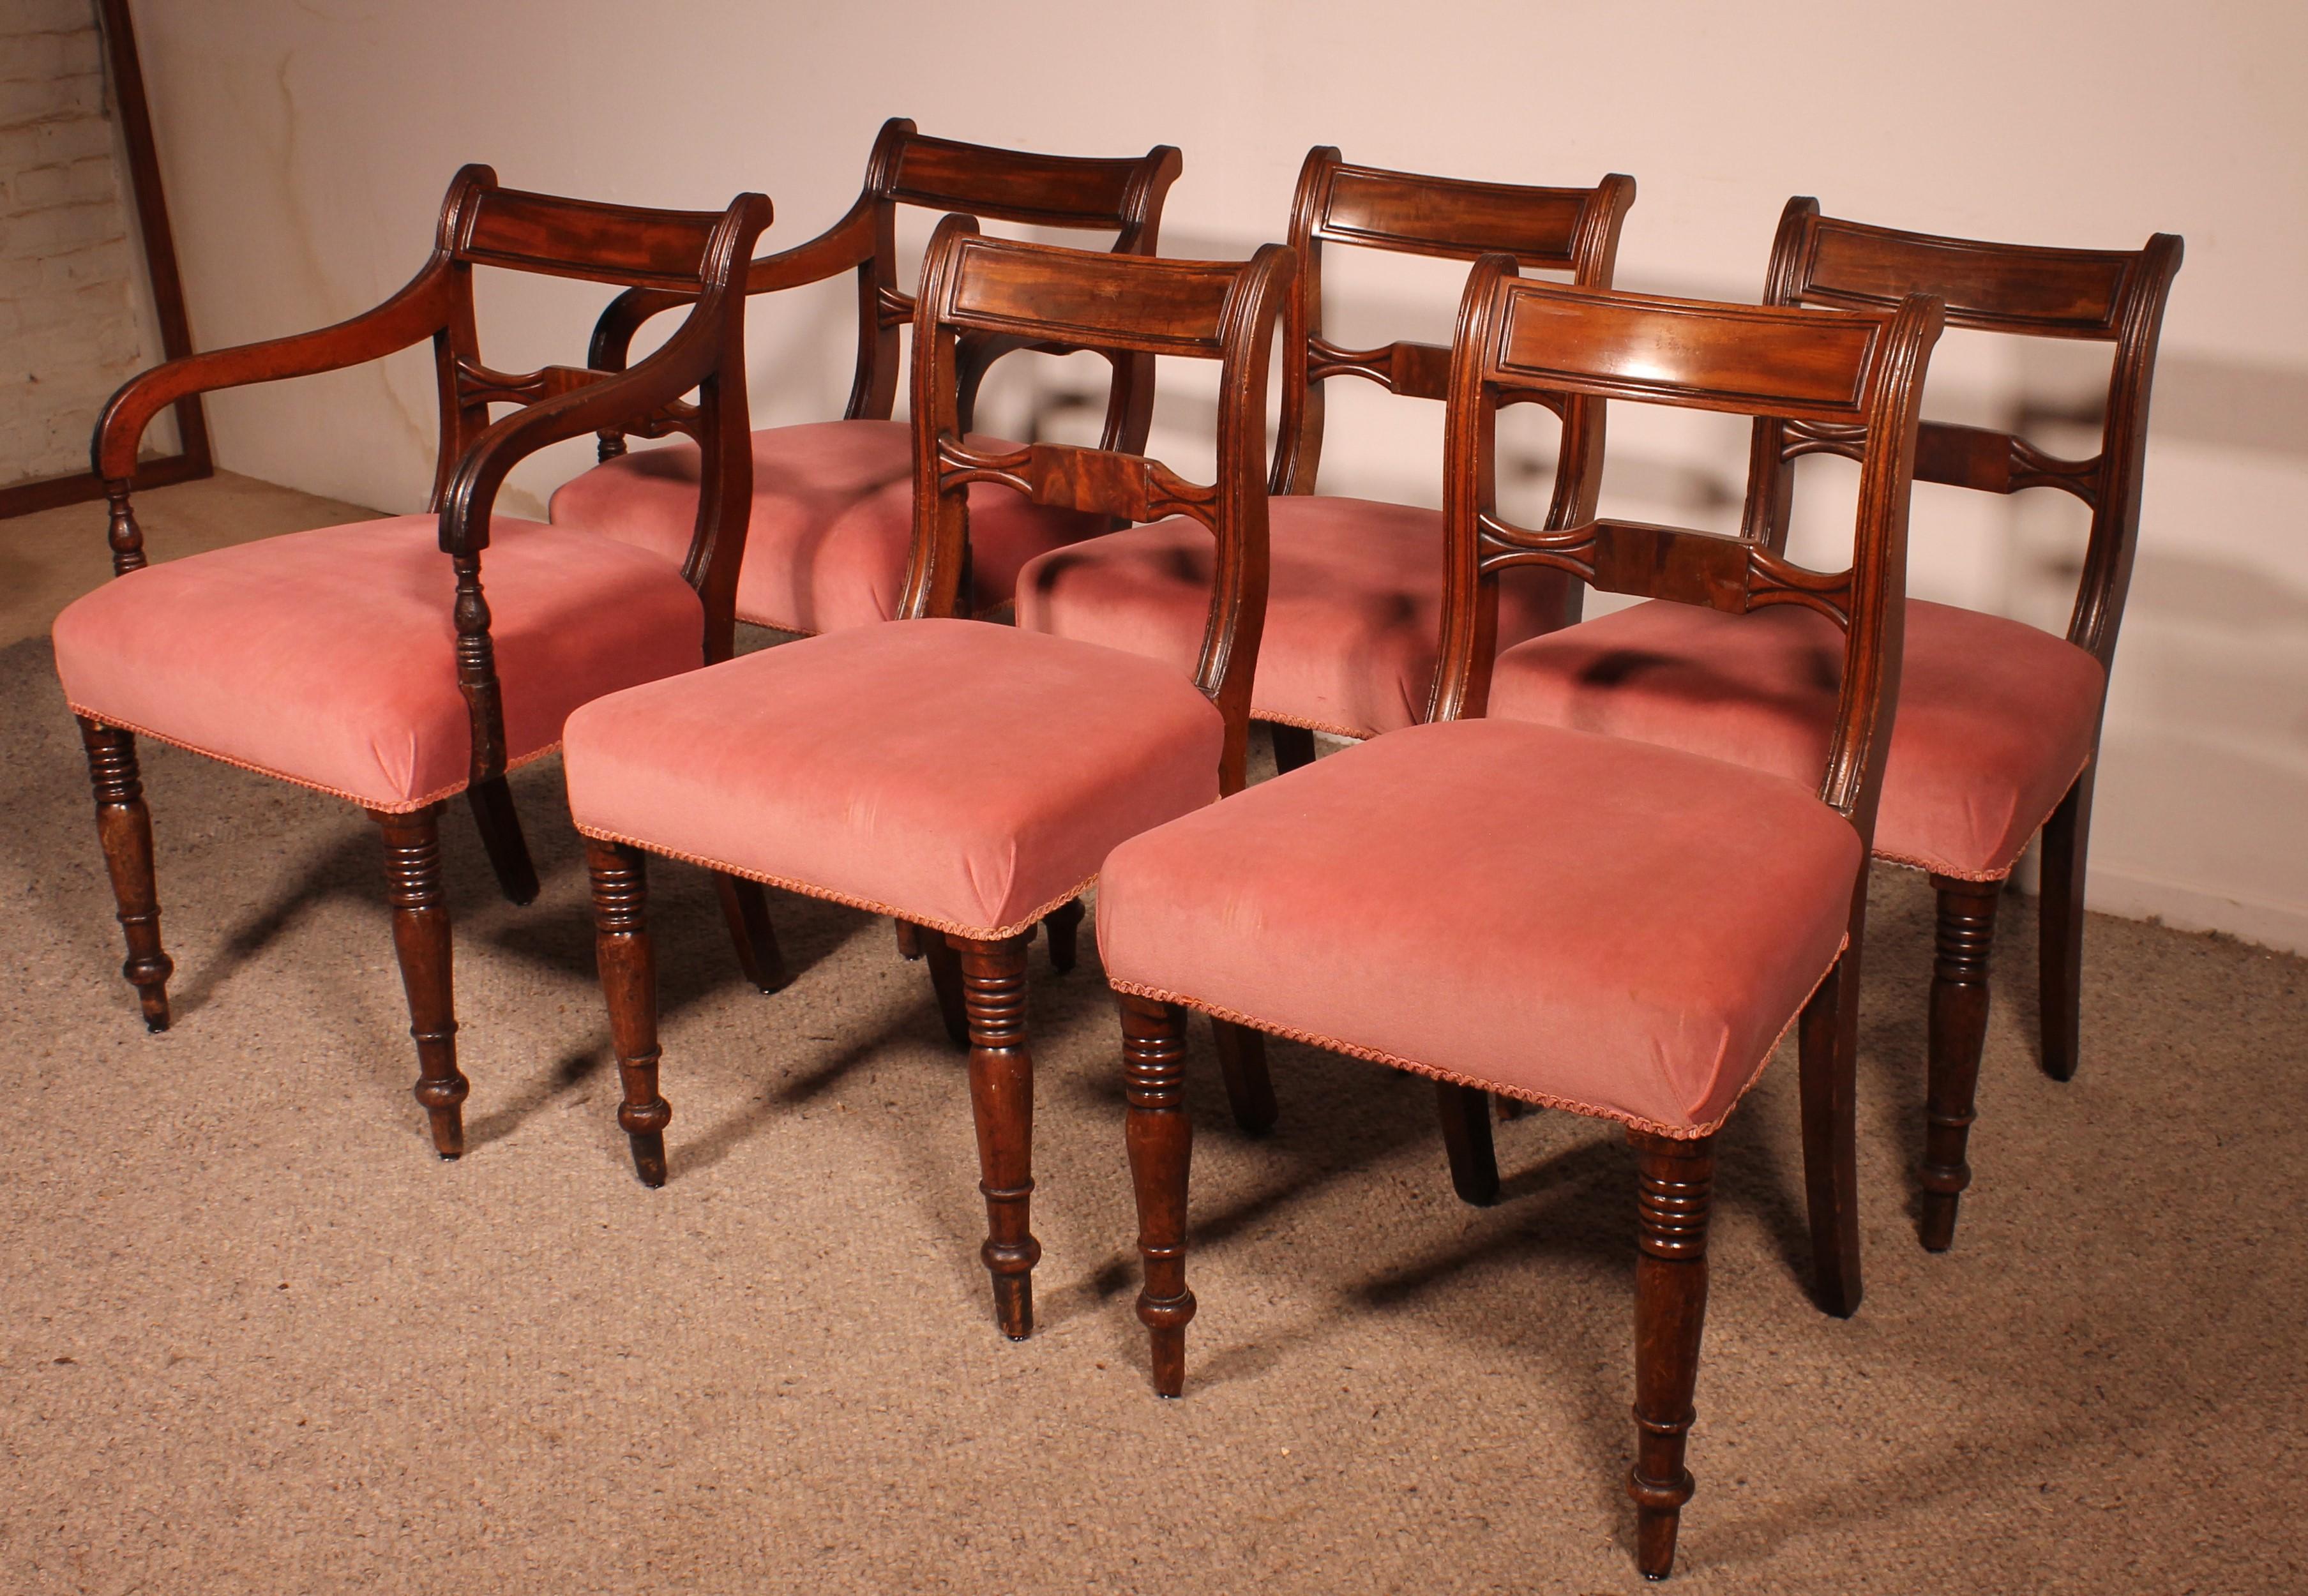 a fine set of 4 mahogany chairs and two armchairs from the 18th century Georgian period from England

Very beautiful set in mahogany which has his beautiful original patina and very beautiful turning
The chairs are very comfortable and are solid and